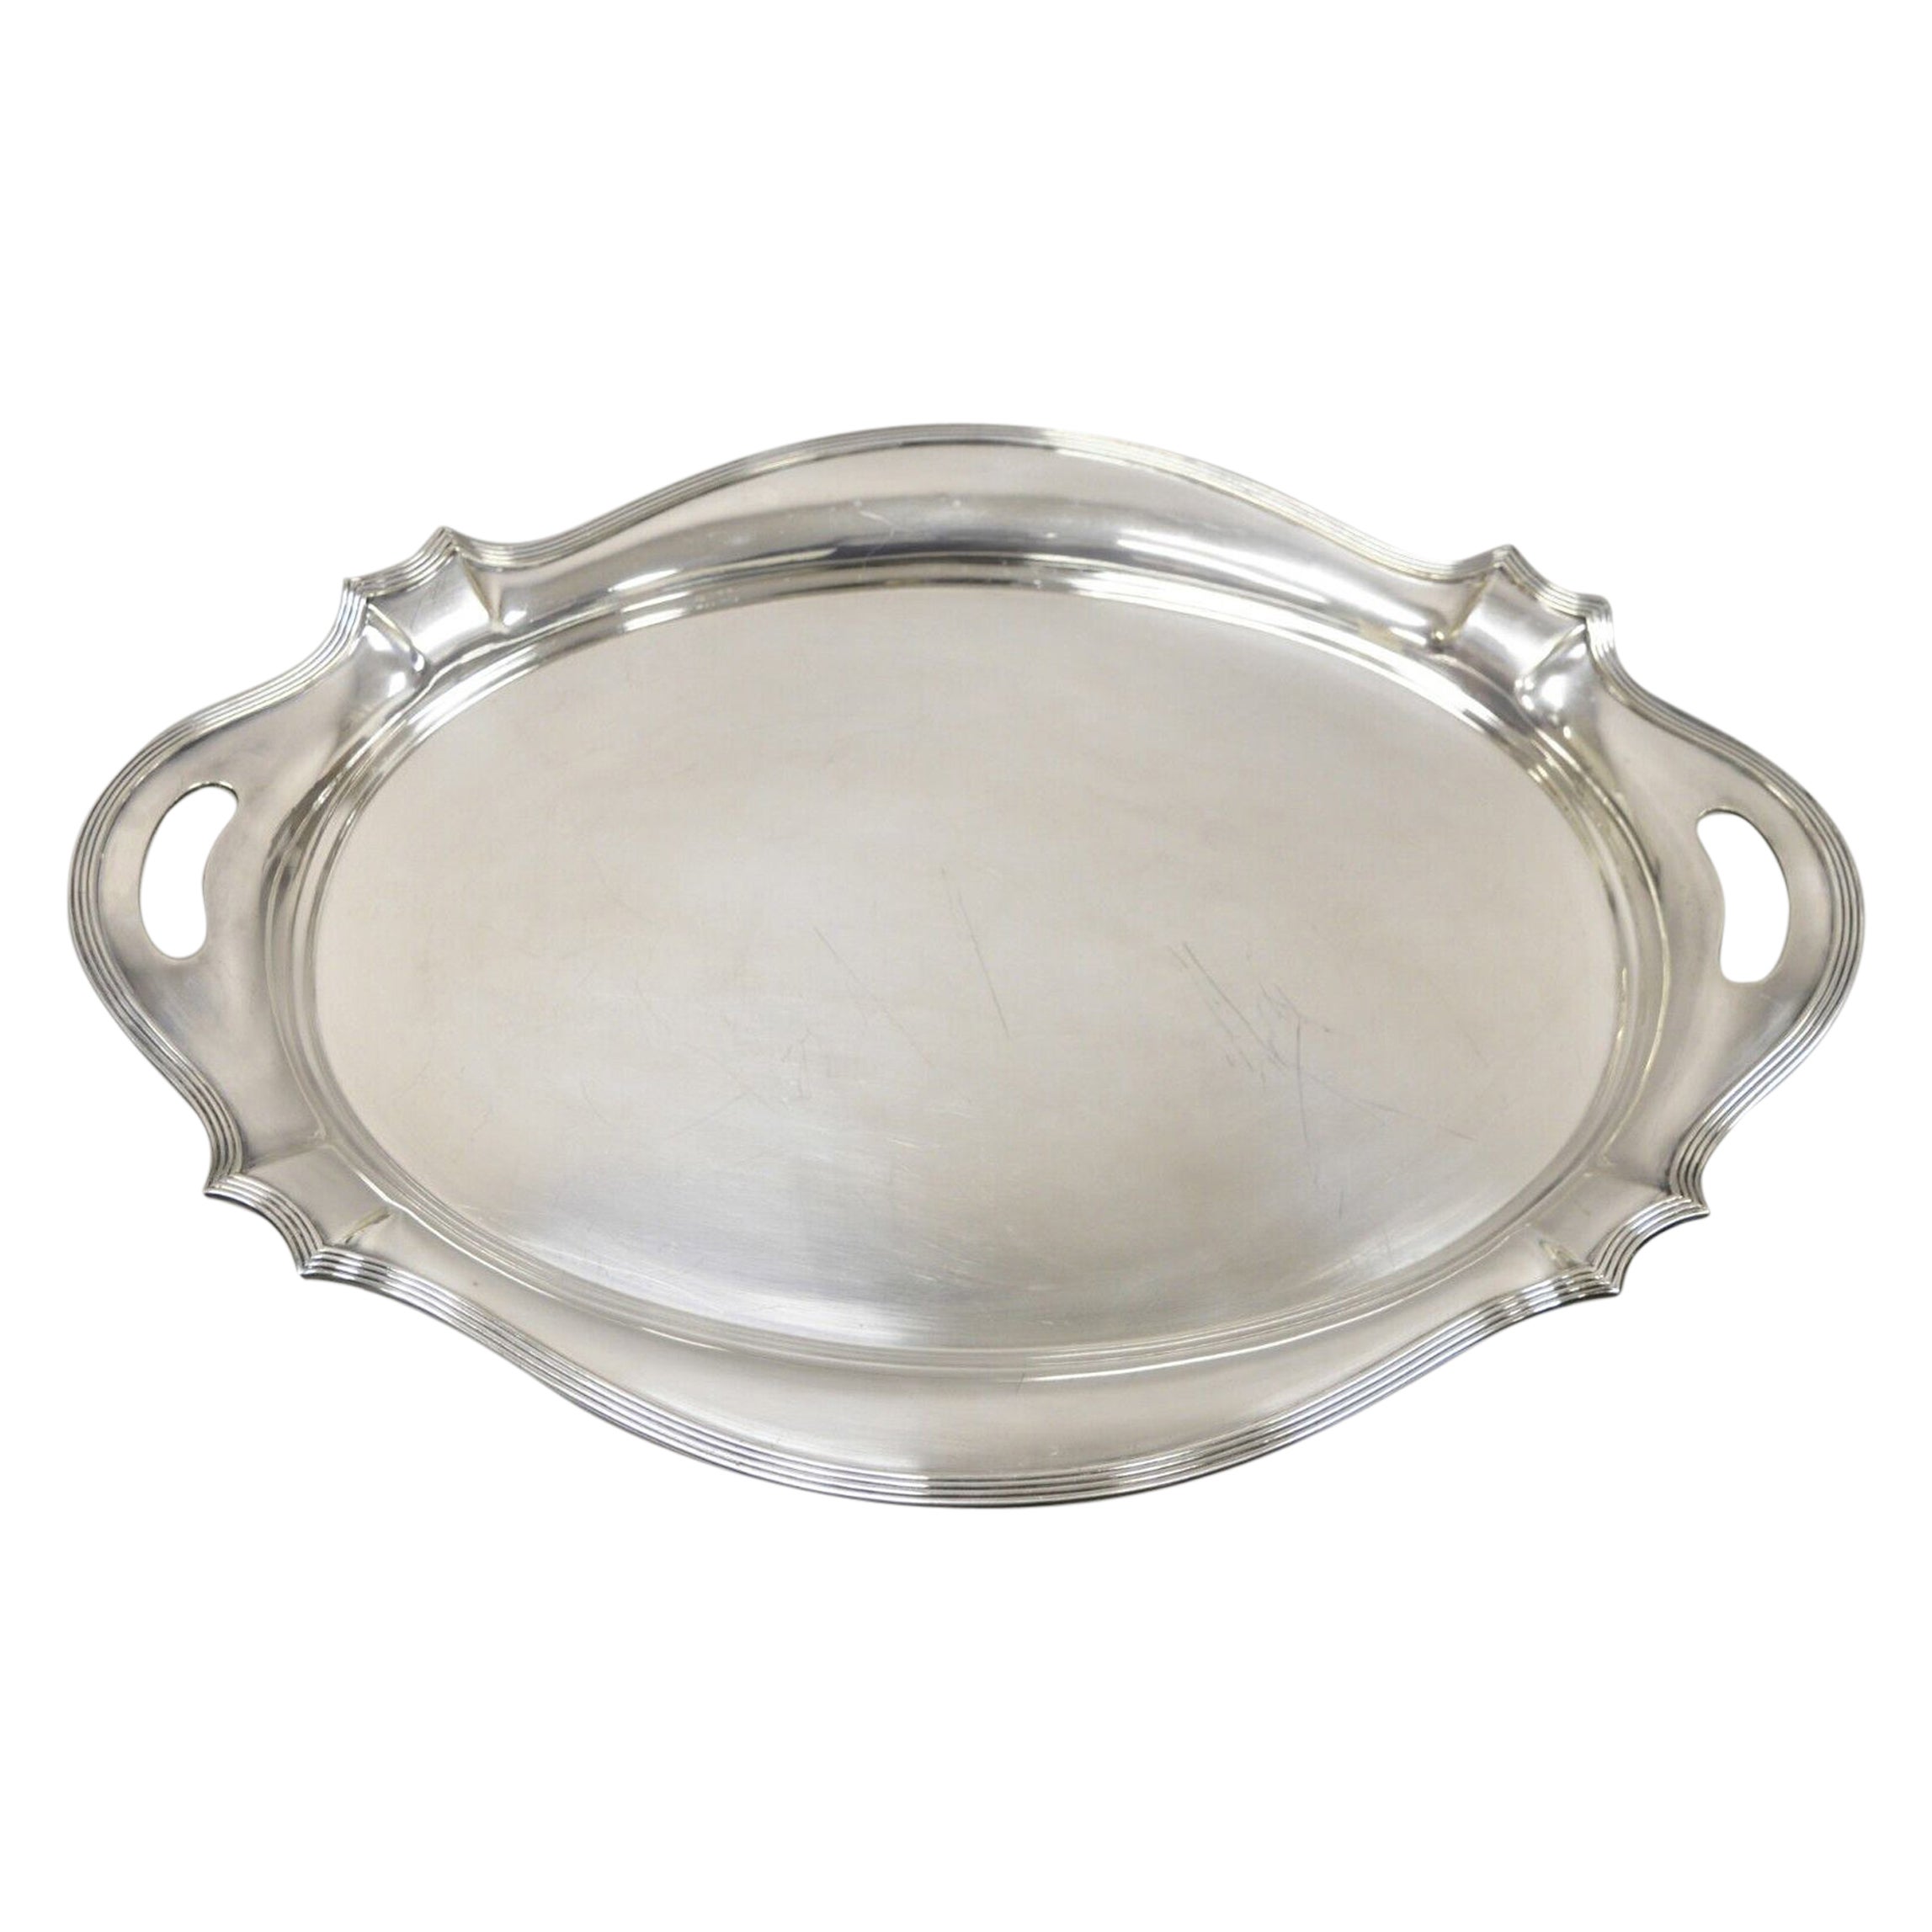 Towle Silversmiths Platters and Serveware - 7 For Sale at 1stDibs | towle  platter, towle serving tray, towle silver serving pieces